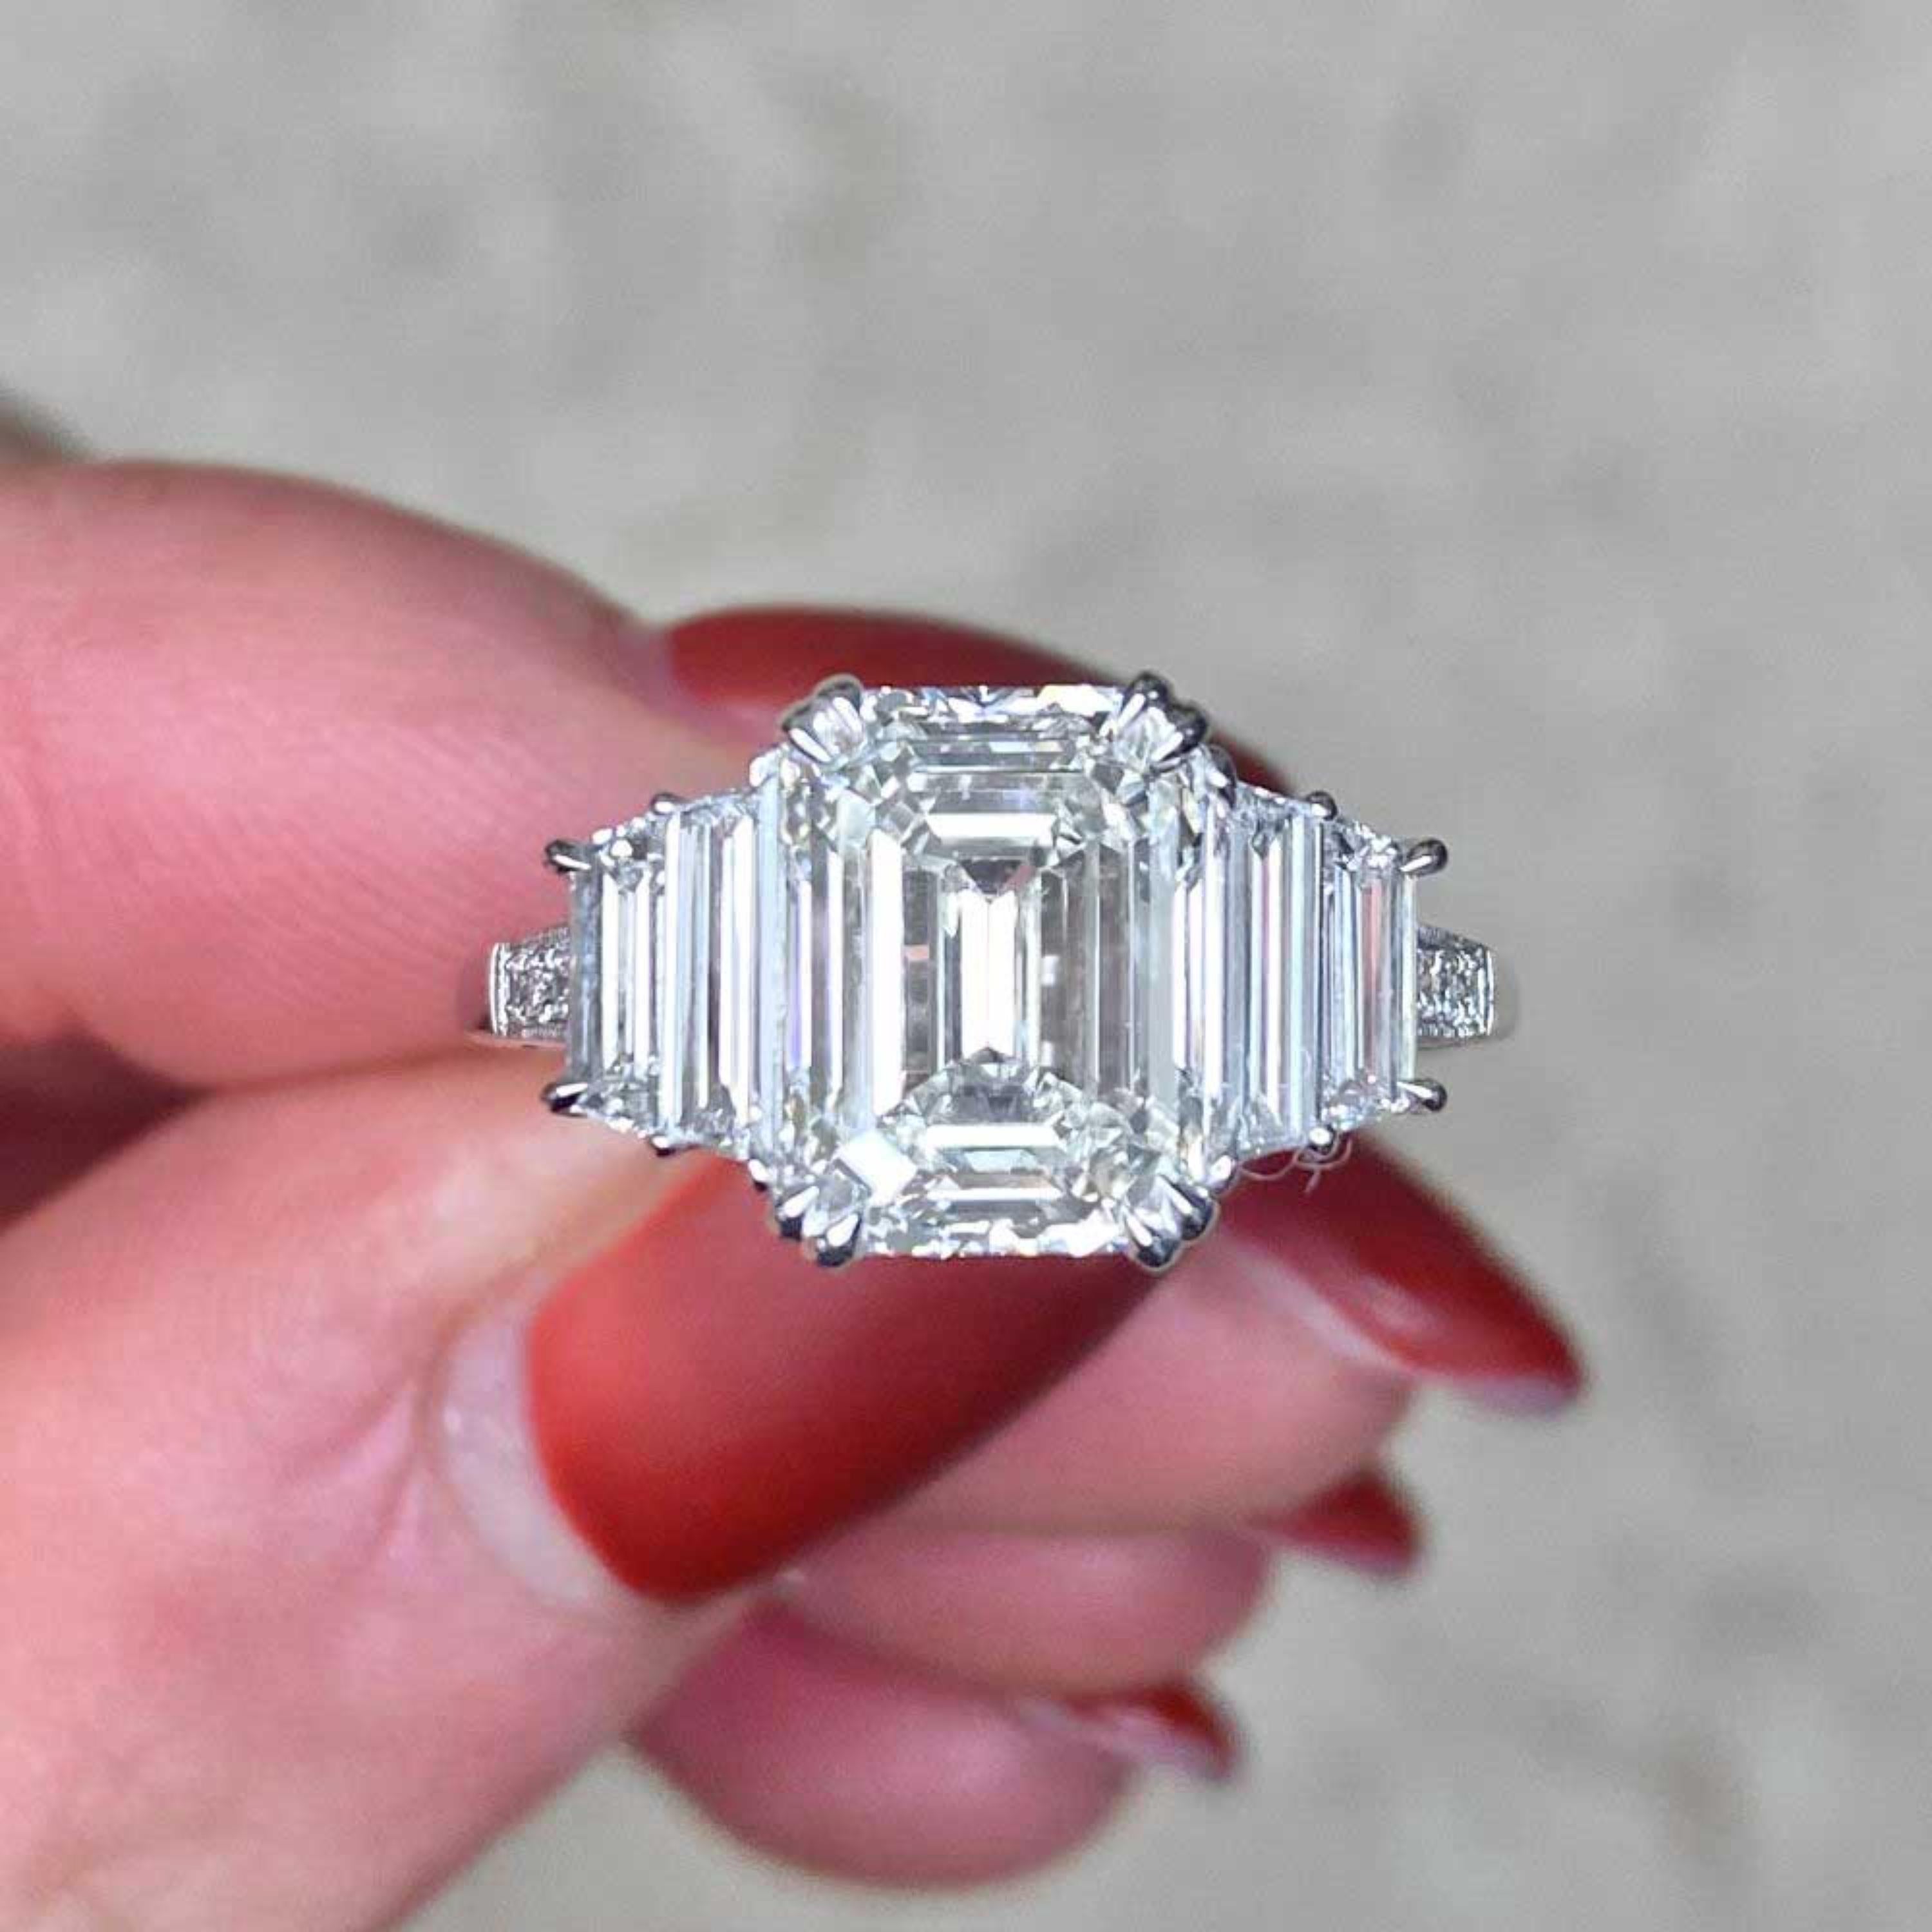 3.15 Carat H VS1 Emerald Cut Diamond Platinum Engagement Ring GIA Certified In New Condition For Sale In Orlando, Florida